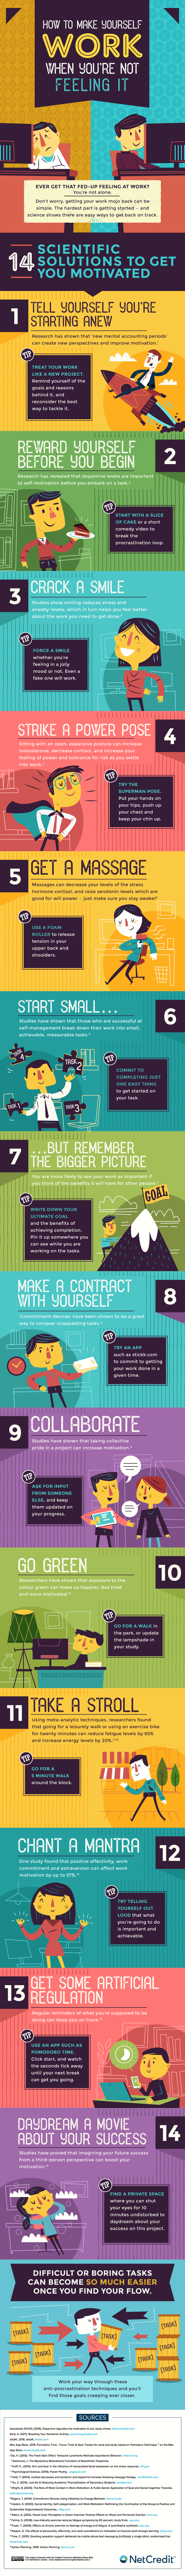 how to motivate yourself to work